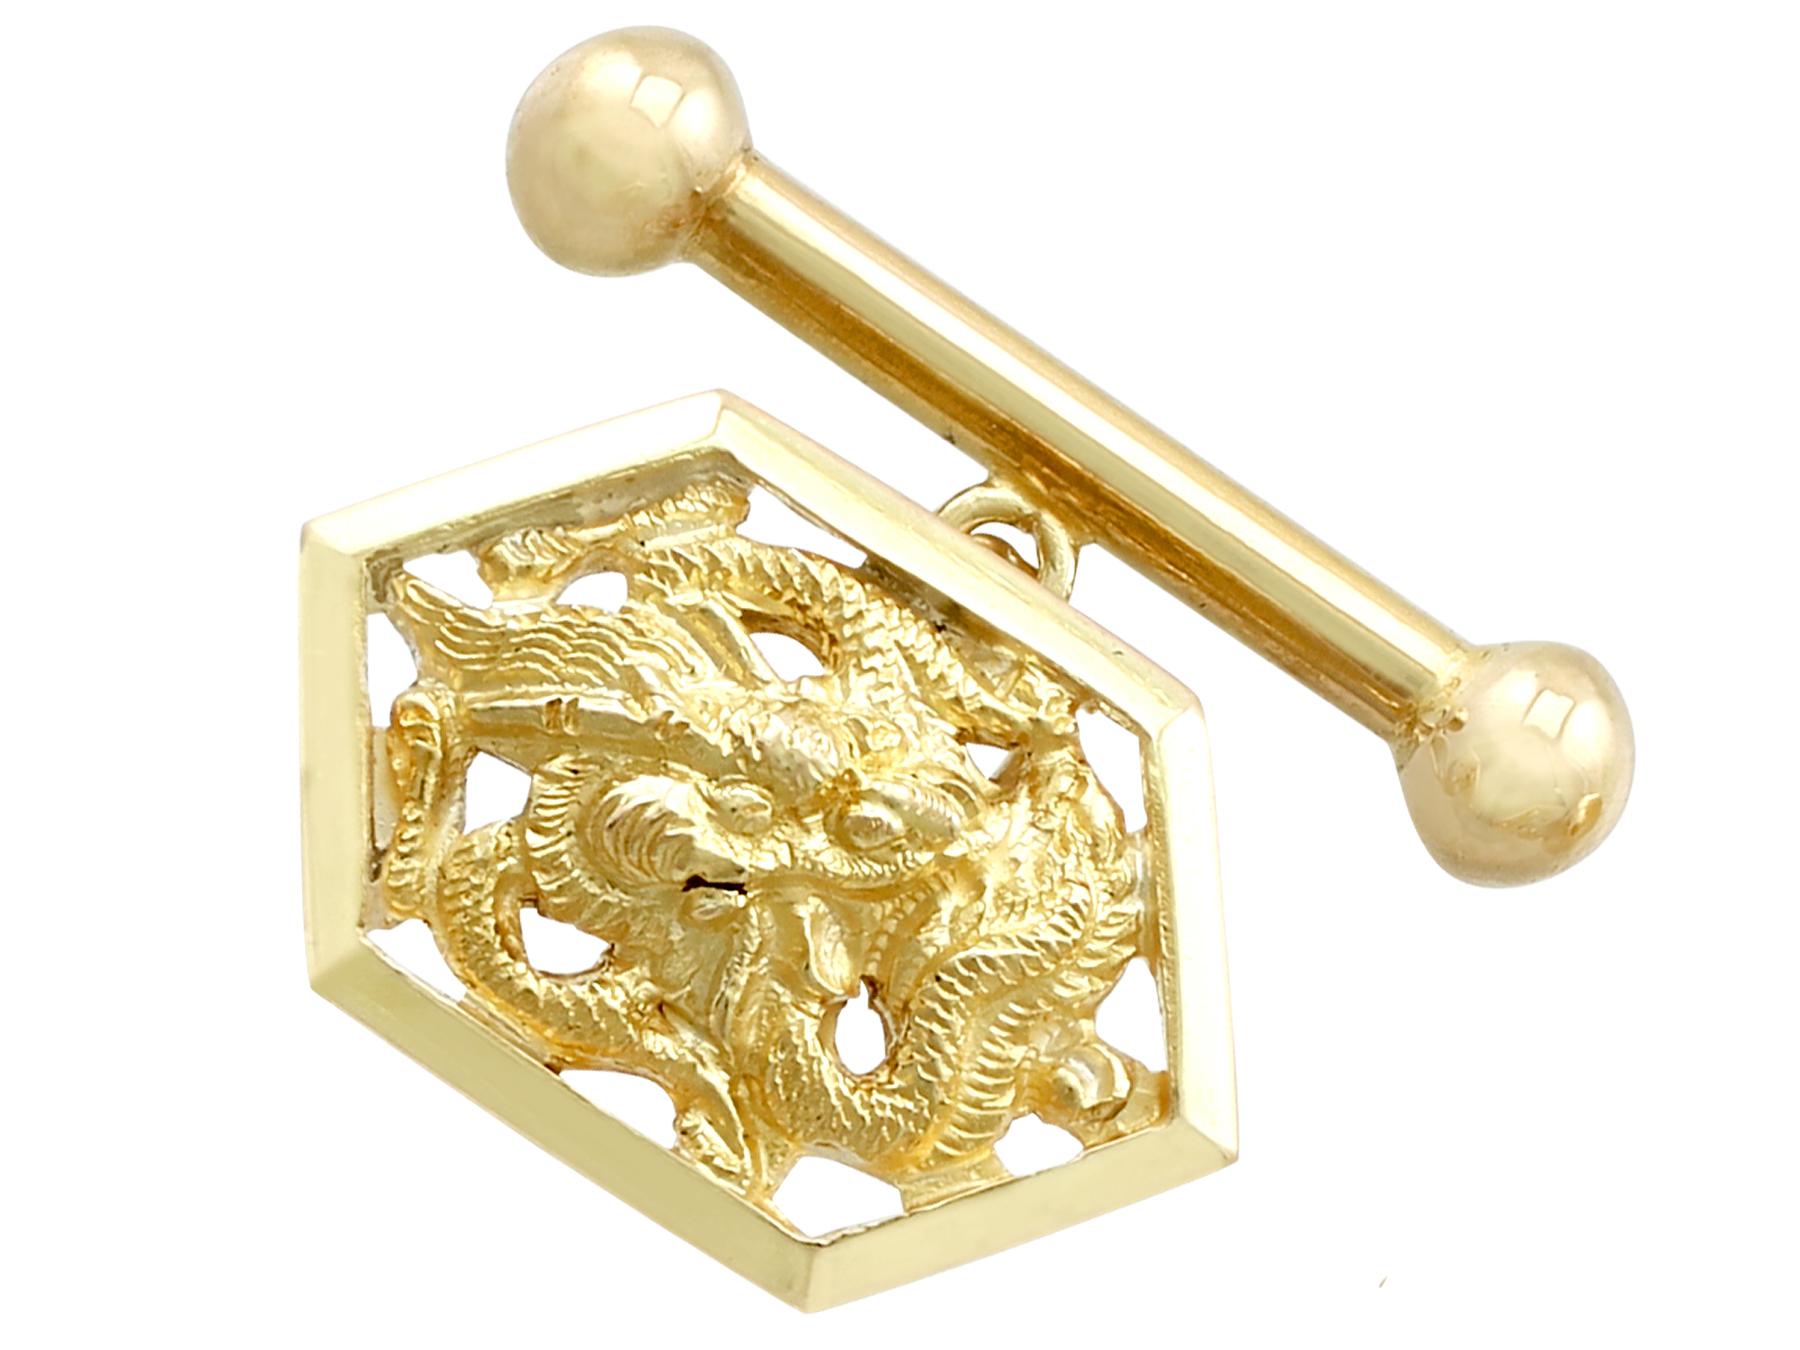 1900s Antique Chinese Yellow Gold Dragon Cufflinks In Excellent Condition For Sale In Jesmond, Newcastle Upon Tyne